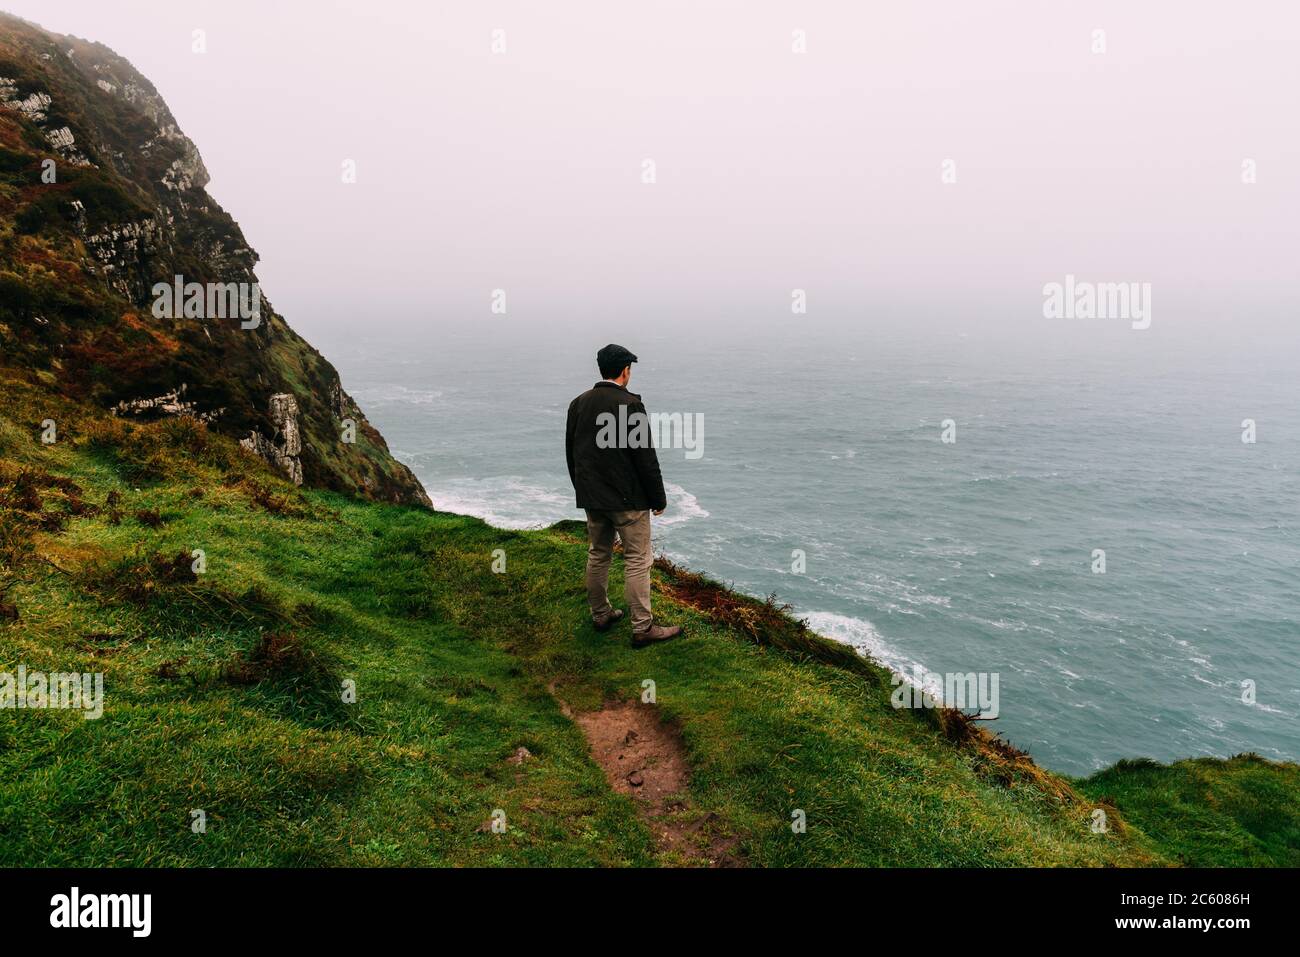 Man wearing cap stands alone in the cliffs of Brandon point in the Wild Atlantic Way of Ireland against the ocean a misty day. Stock Photo